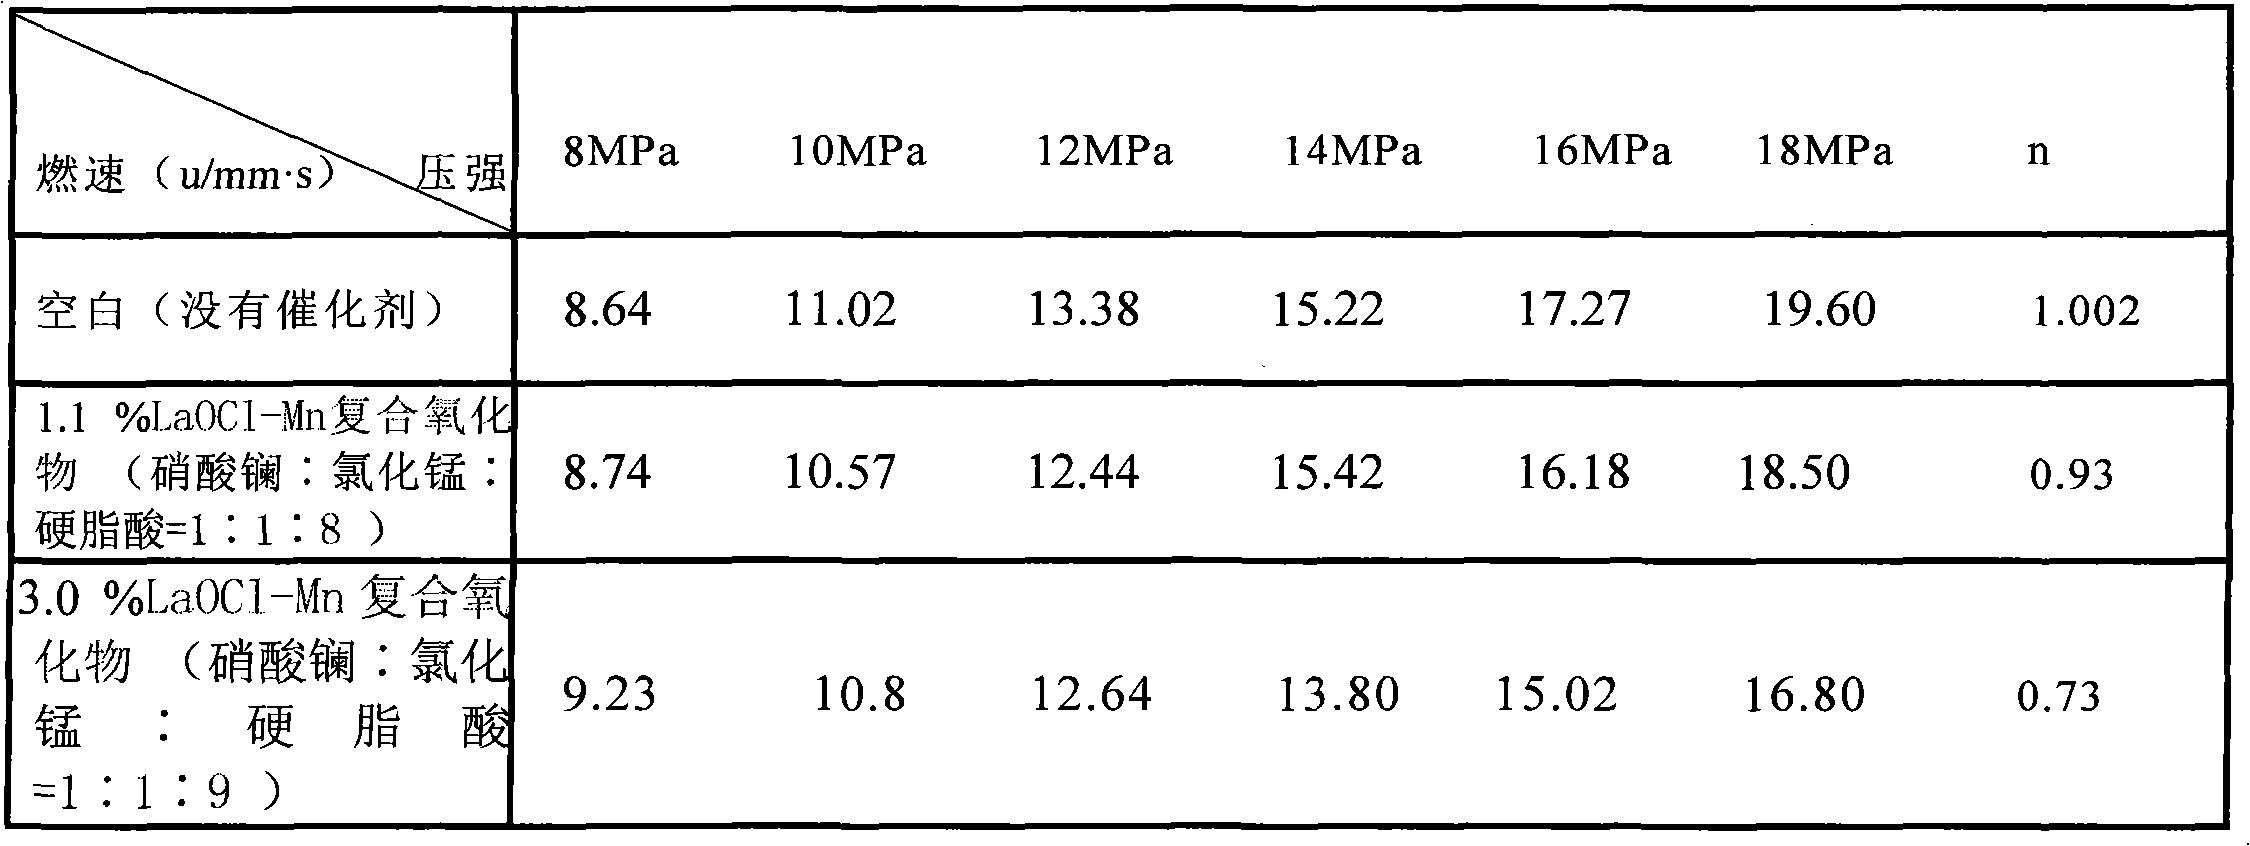 Catalyst for accelerating burning rate used for reducing pressure exponent of nitramine propellant